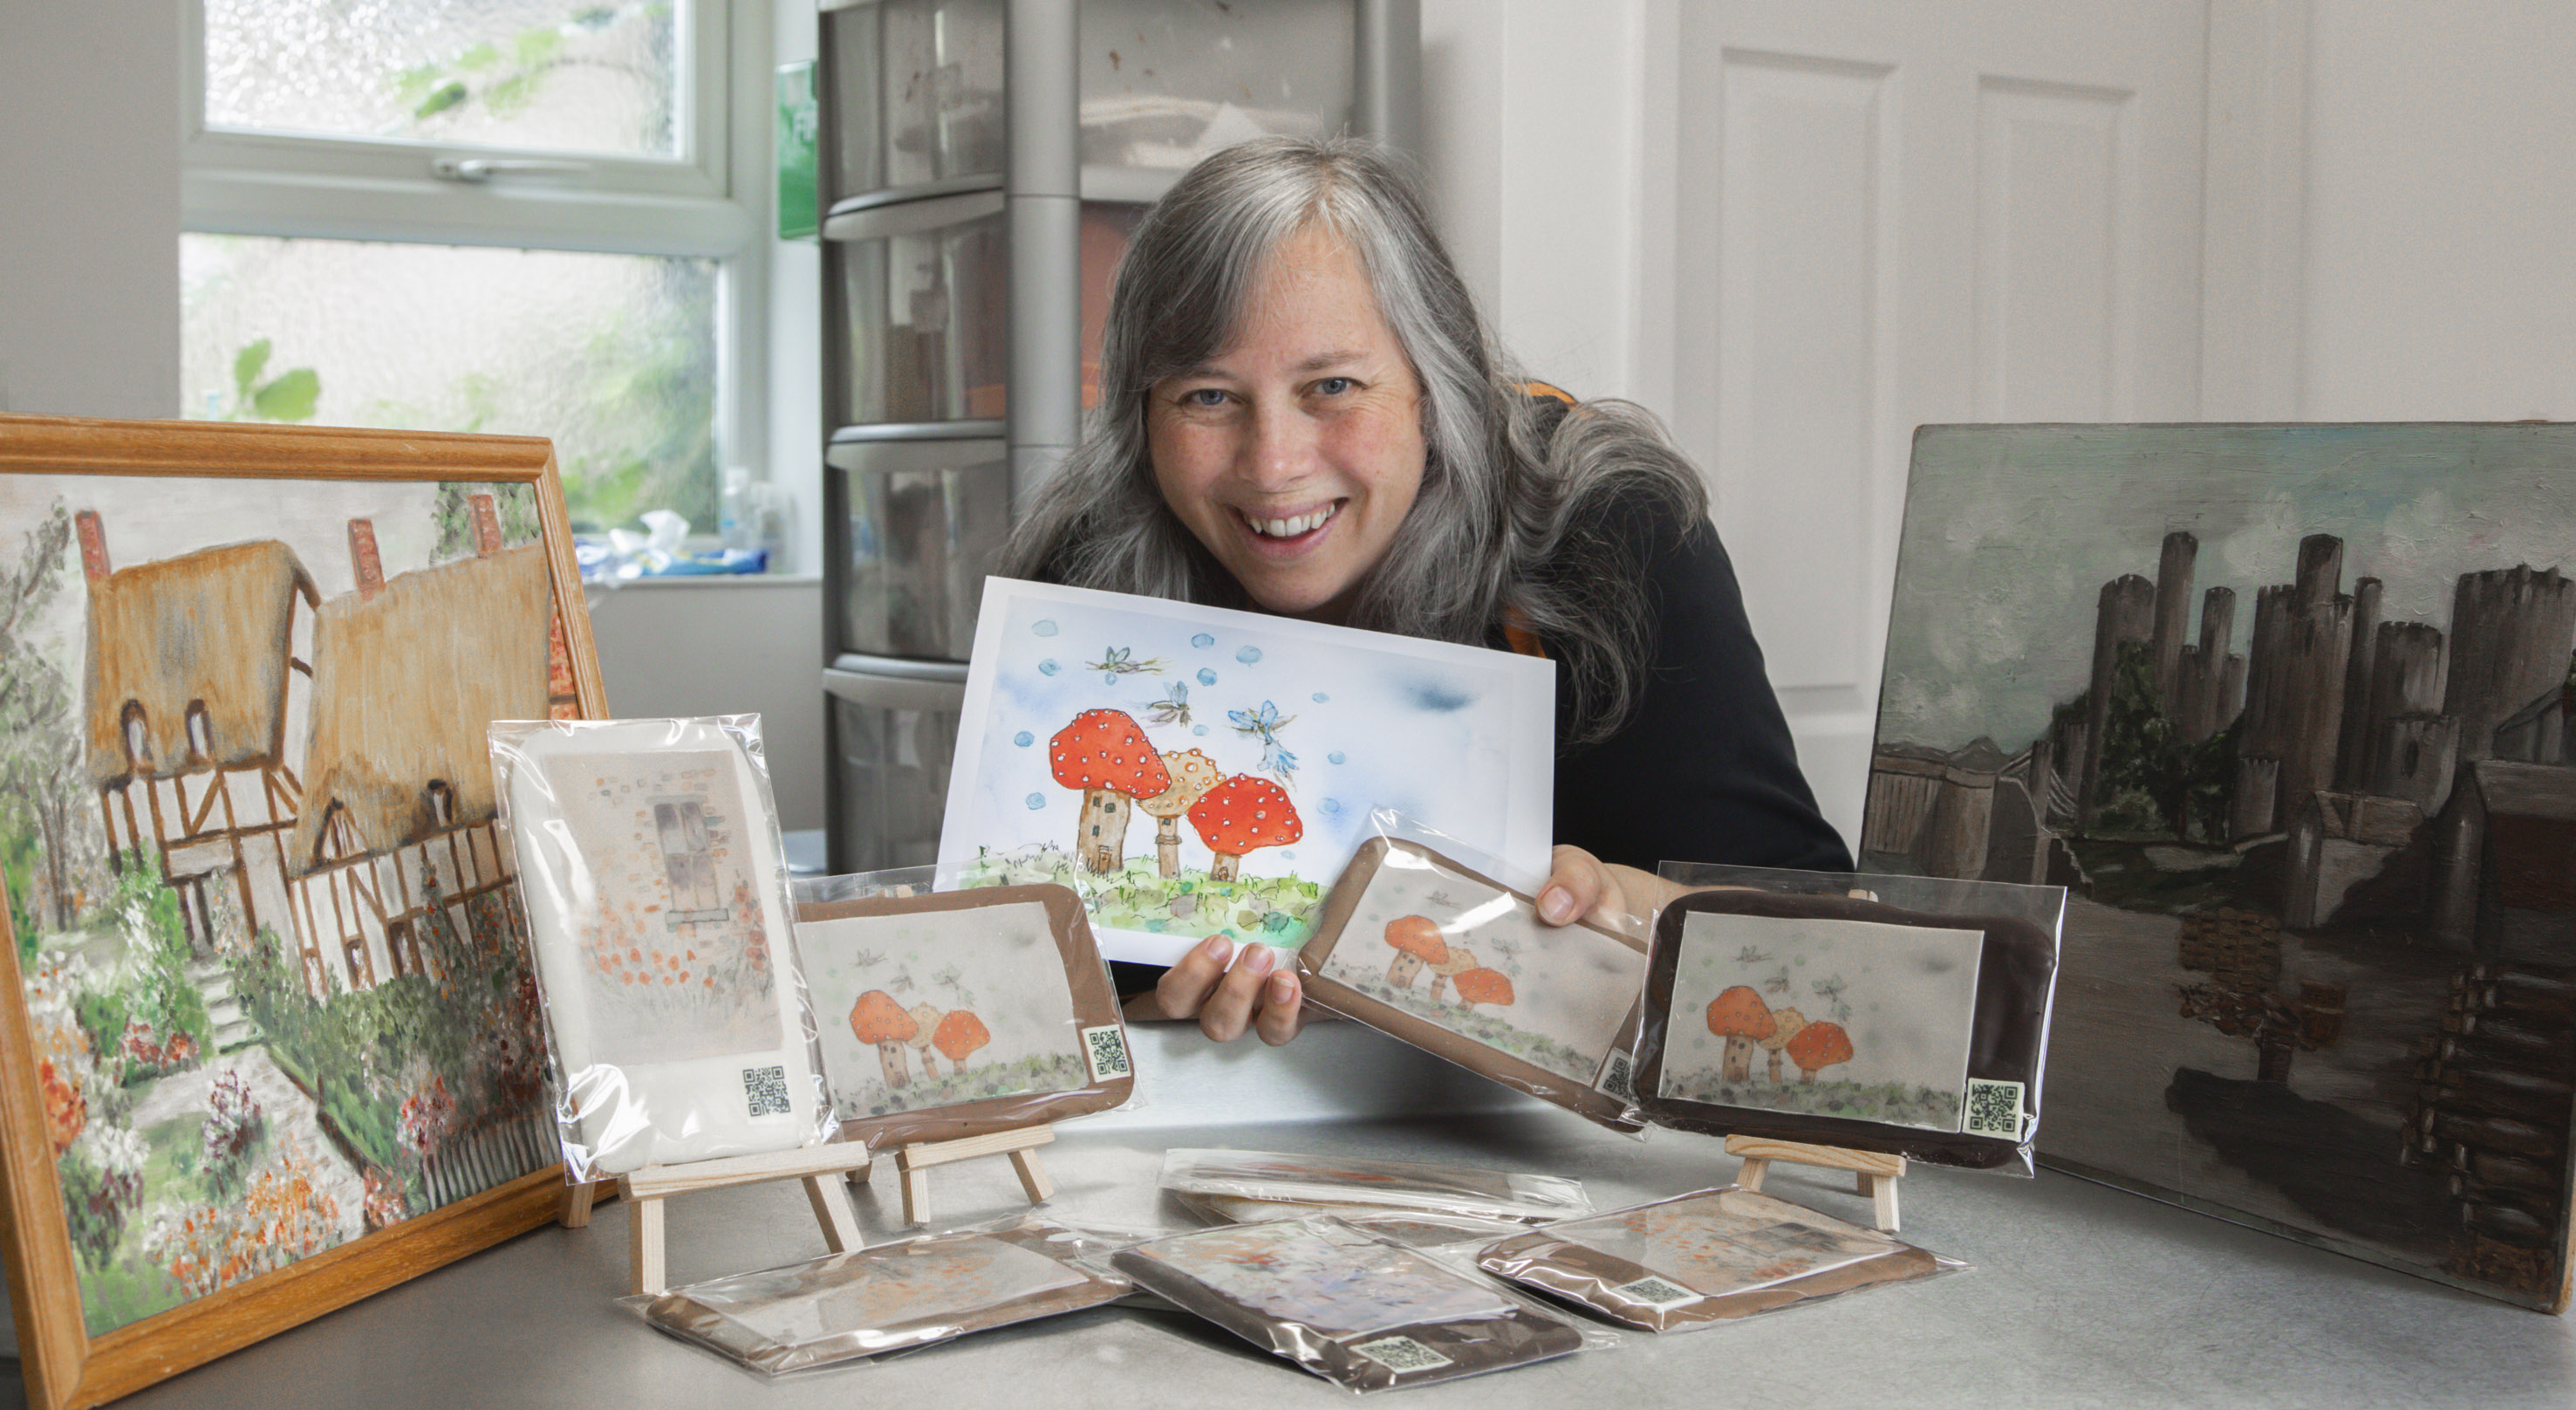 Paintings by artist with dementia printed on chocolate bars to raise money for charity